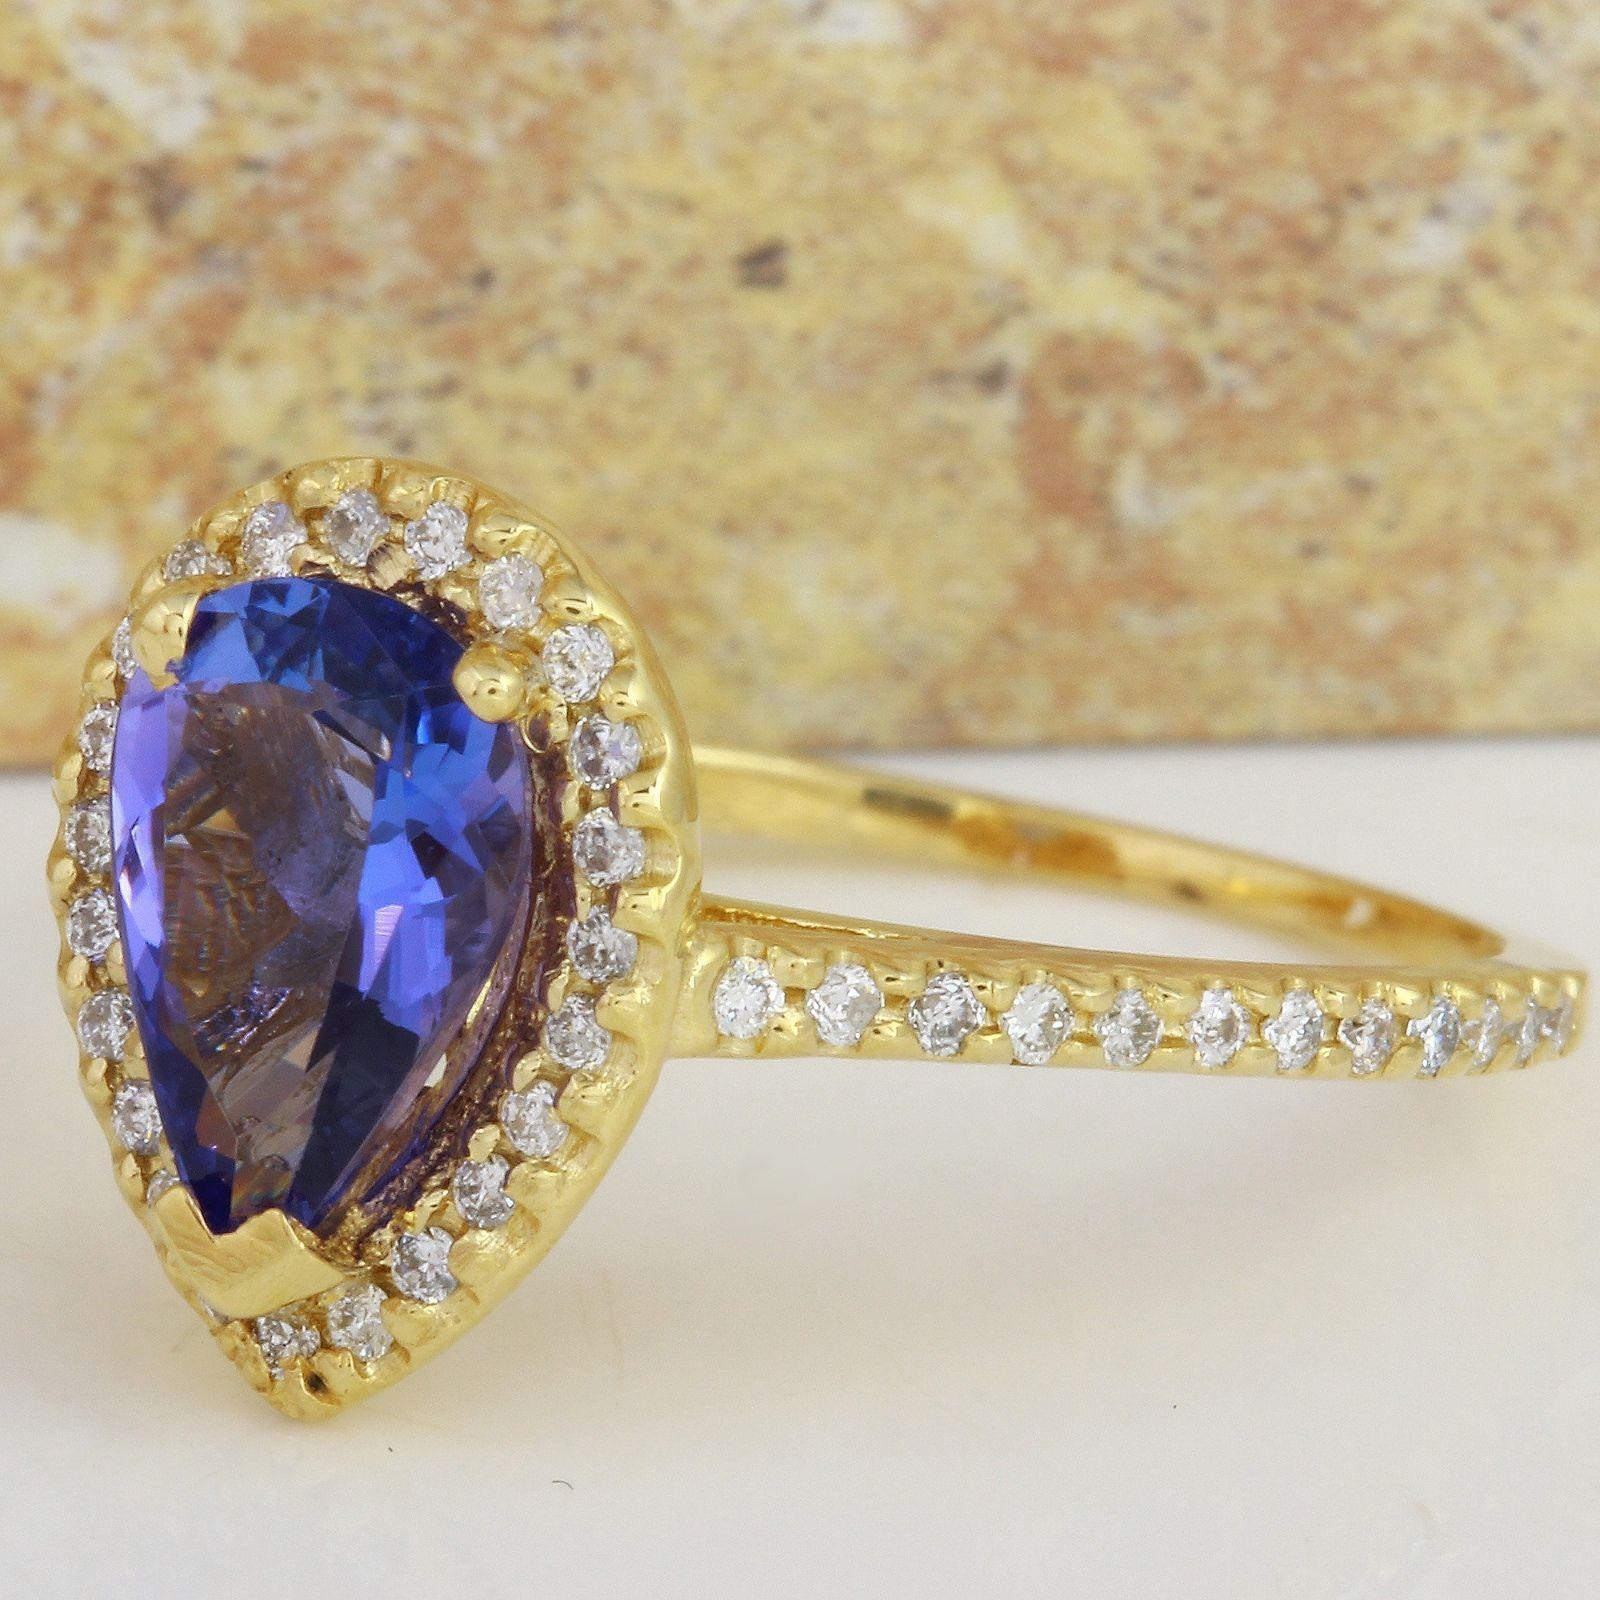 1.50 Carats Natural Very Nice Looking Tanzanite and Diamond 14K Solid Yellow Gold Ring

Total Natural Pear Cut Tanzanite Weight is: Approx. 1.10 Carats

Tanzanite Treatment: Heat

Natural Round Diamonds Weight: Approx. 0.40 Carats (color G-H /